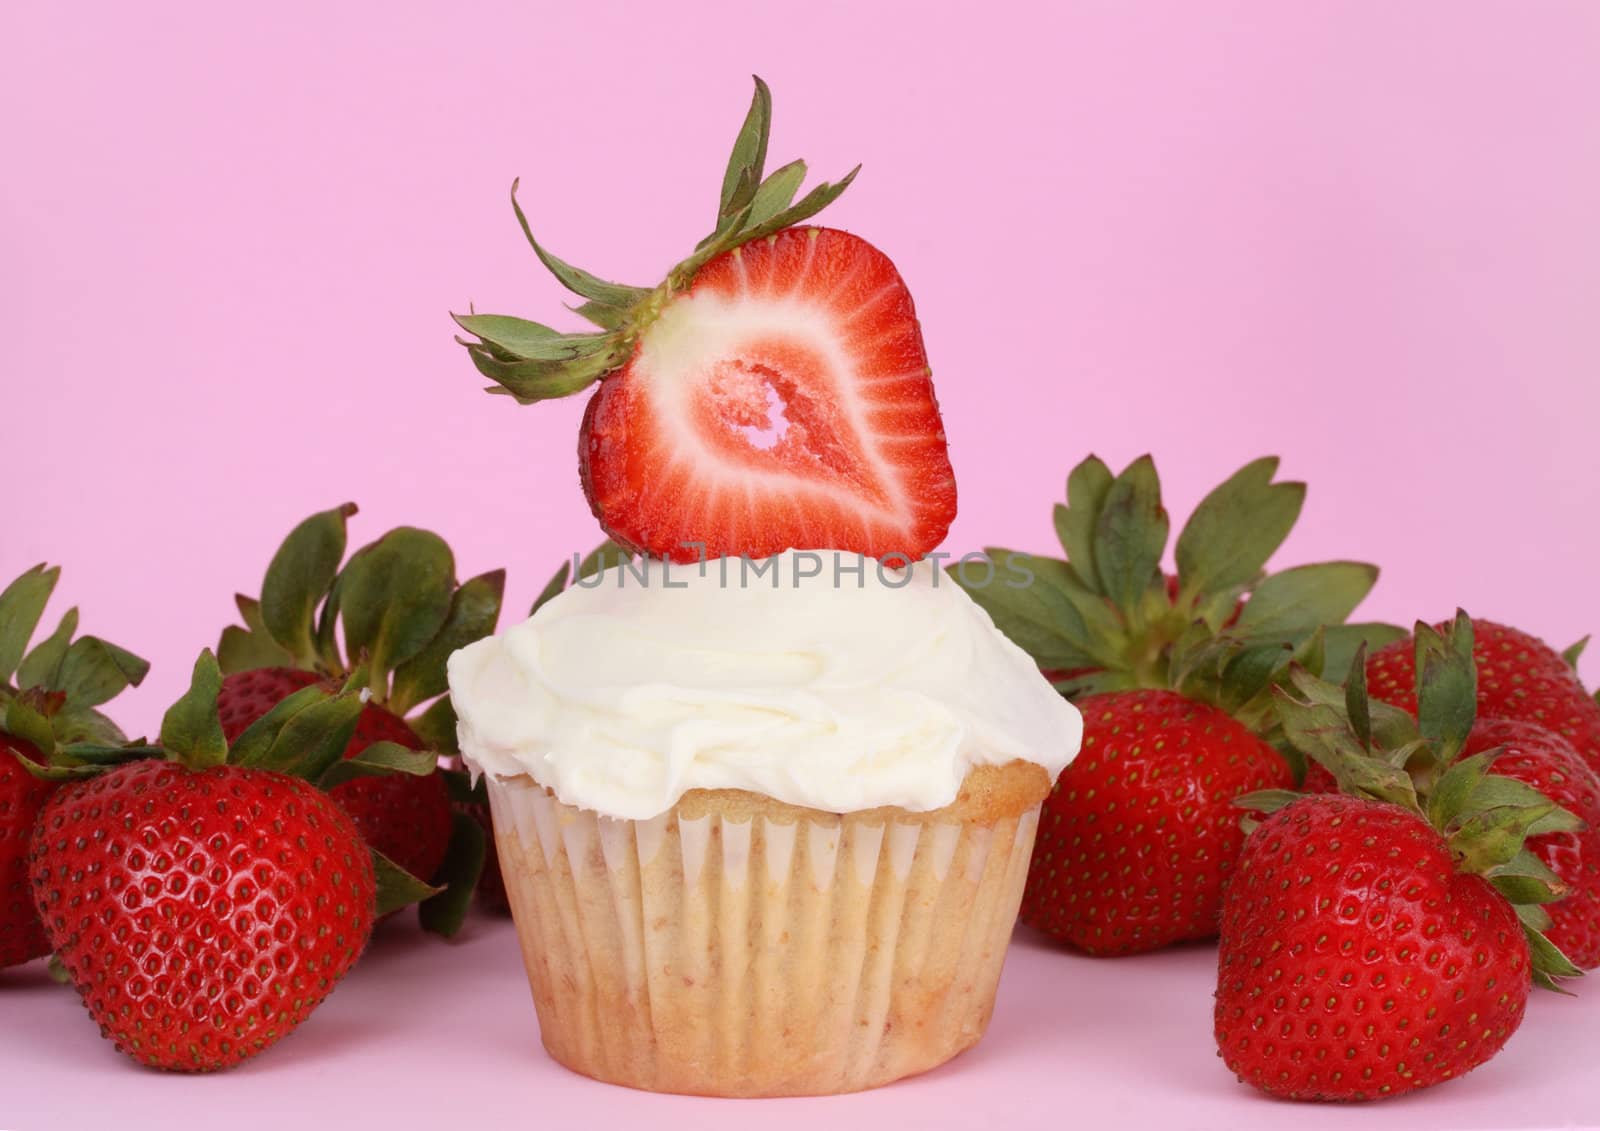 cupcake with white icing and strawberries